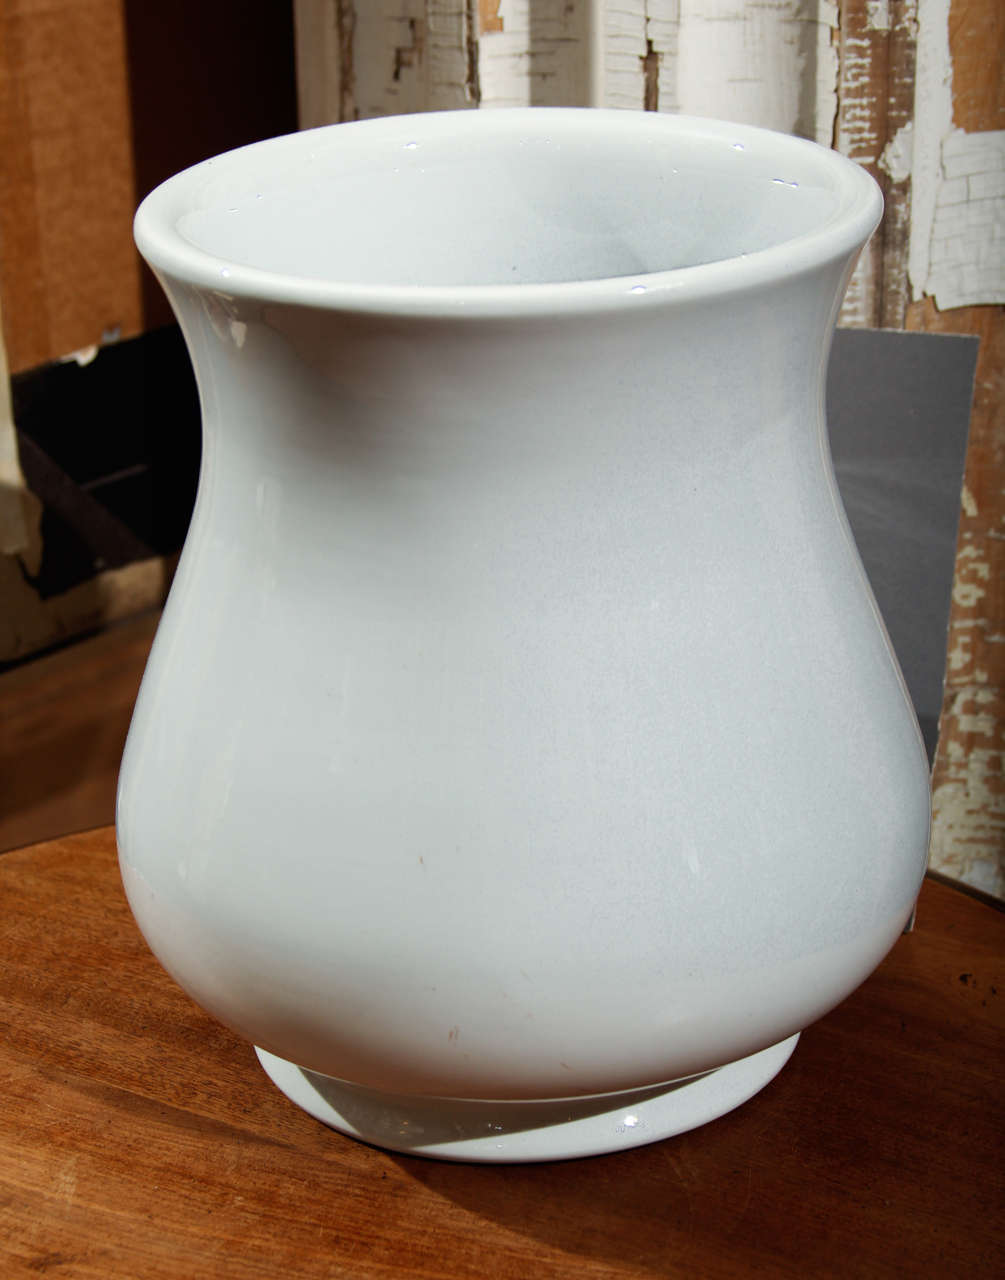 Very simple, elegant English ironstone waste bucket that is a beautiful vase or great holder for kitchen utensils.